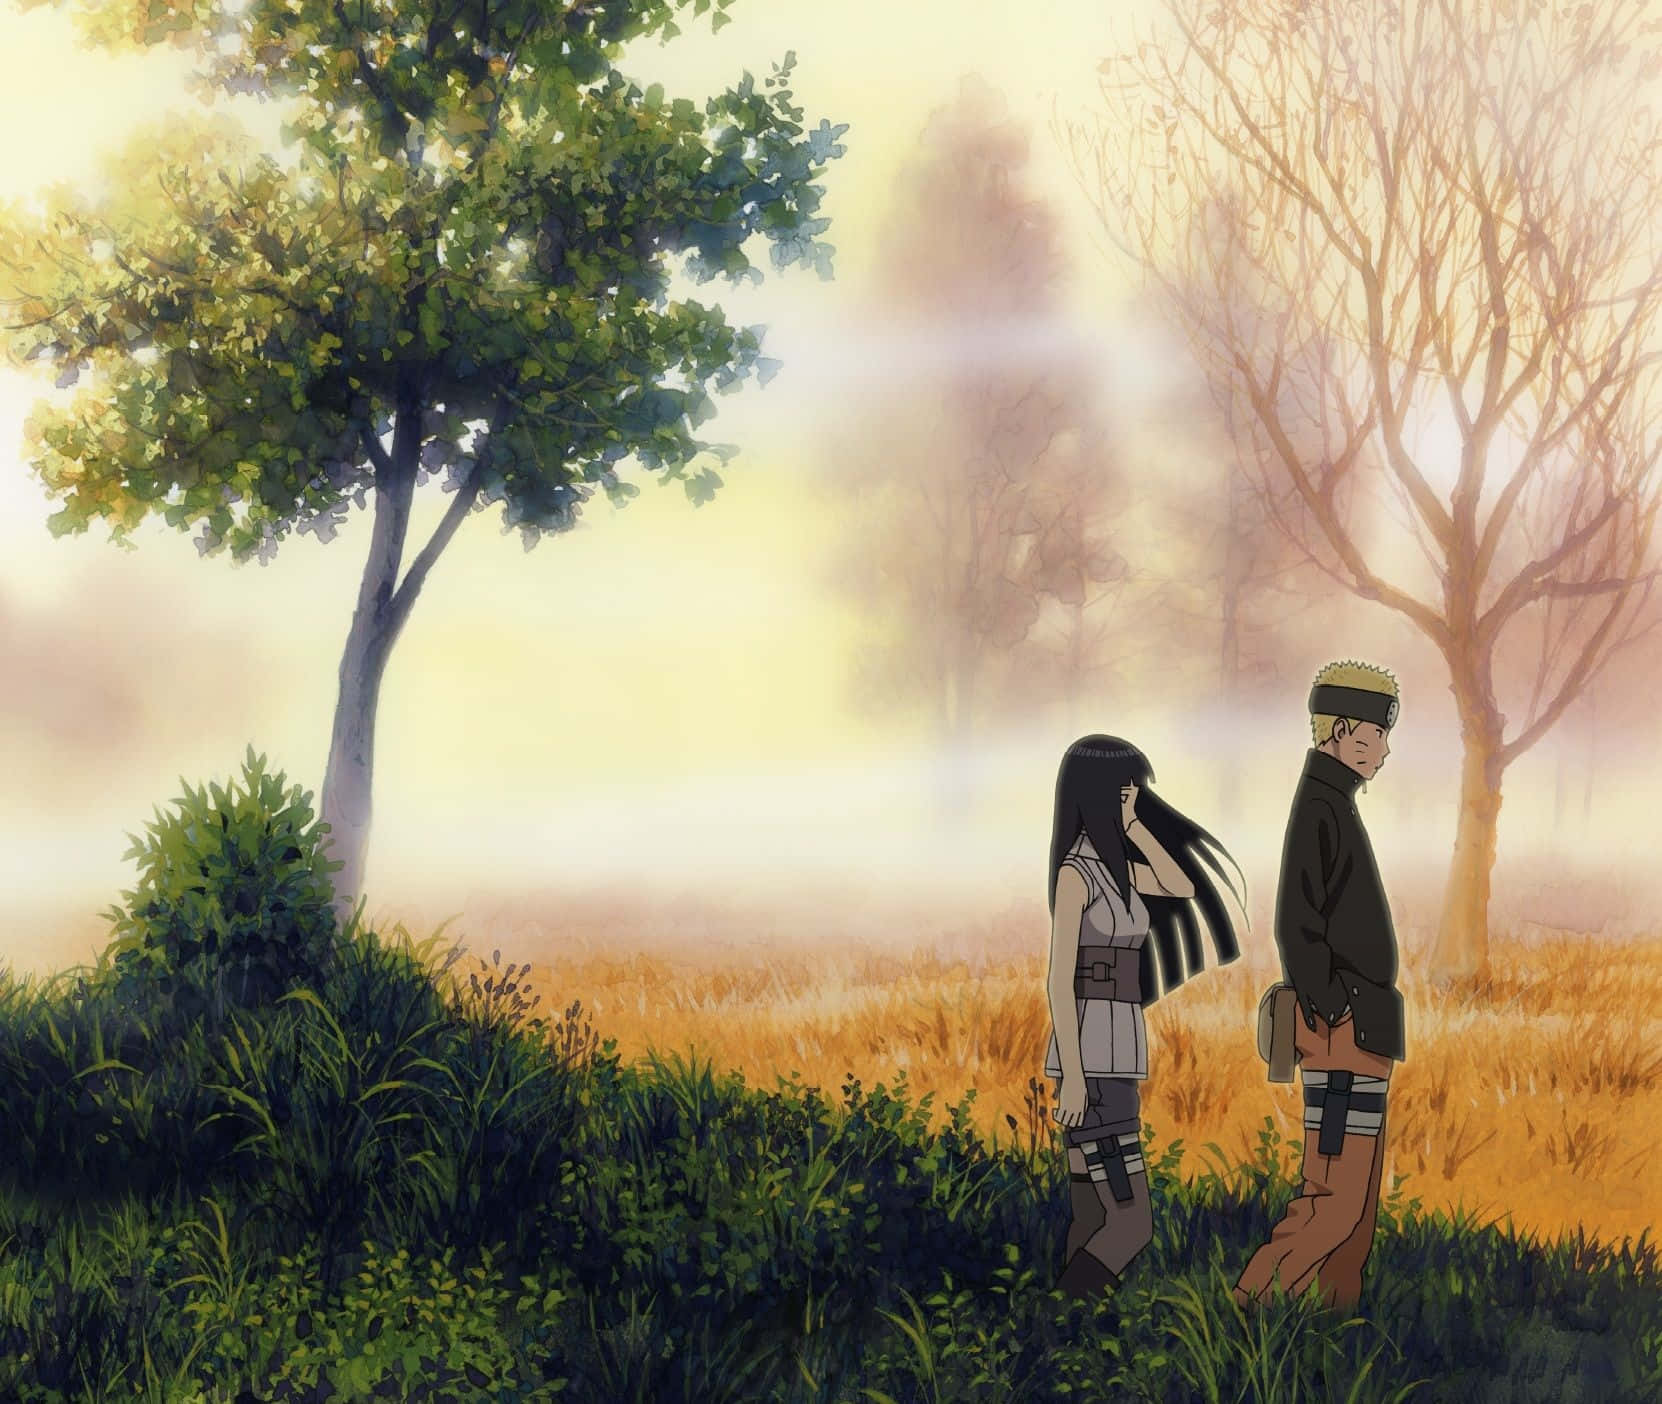 Join Naruto on his journey through the vibrant Naruto Landscape Wallpaper